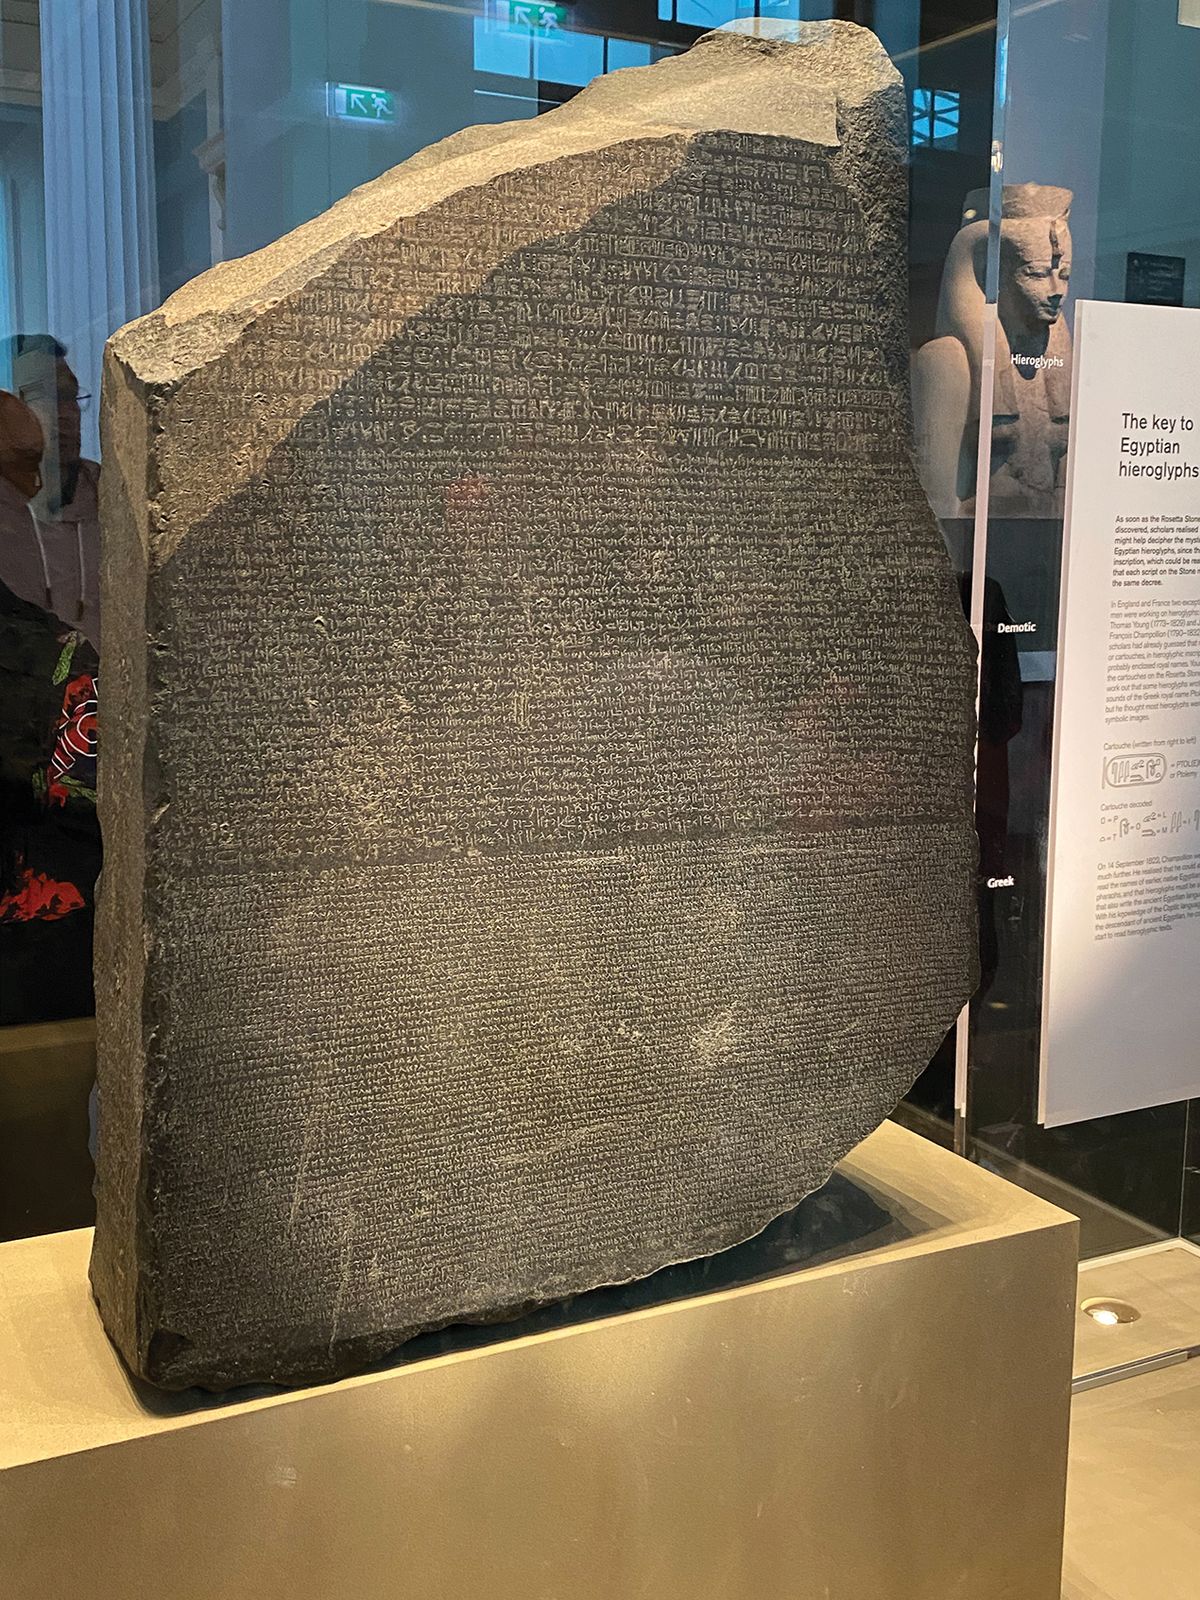 Using new technology, the collective Looty carried out a “daring digital heist” at the British Museum in order to “return” the Rosetta Stone to Egypt © EWY Media